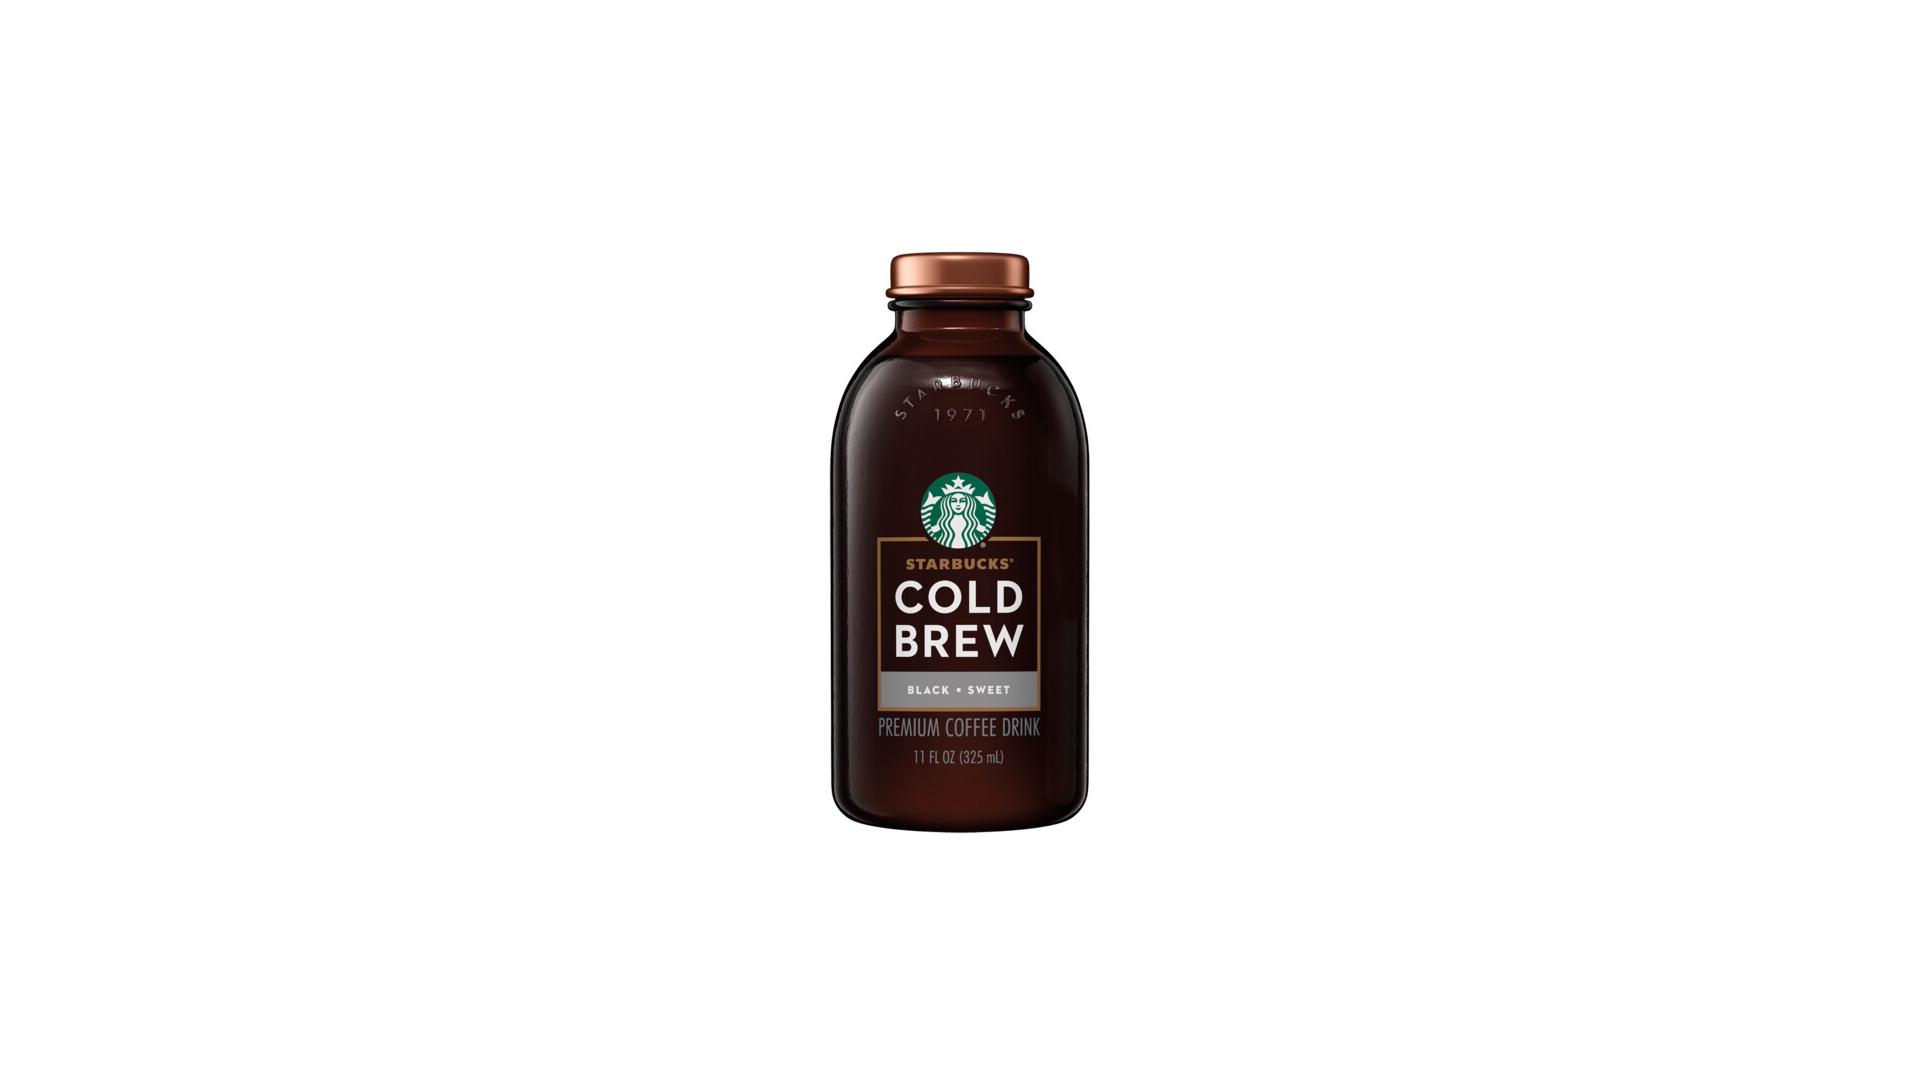 Cold Brew- Black and Sweet